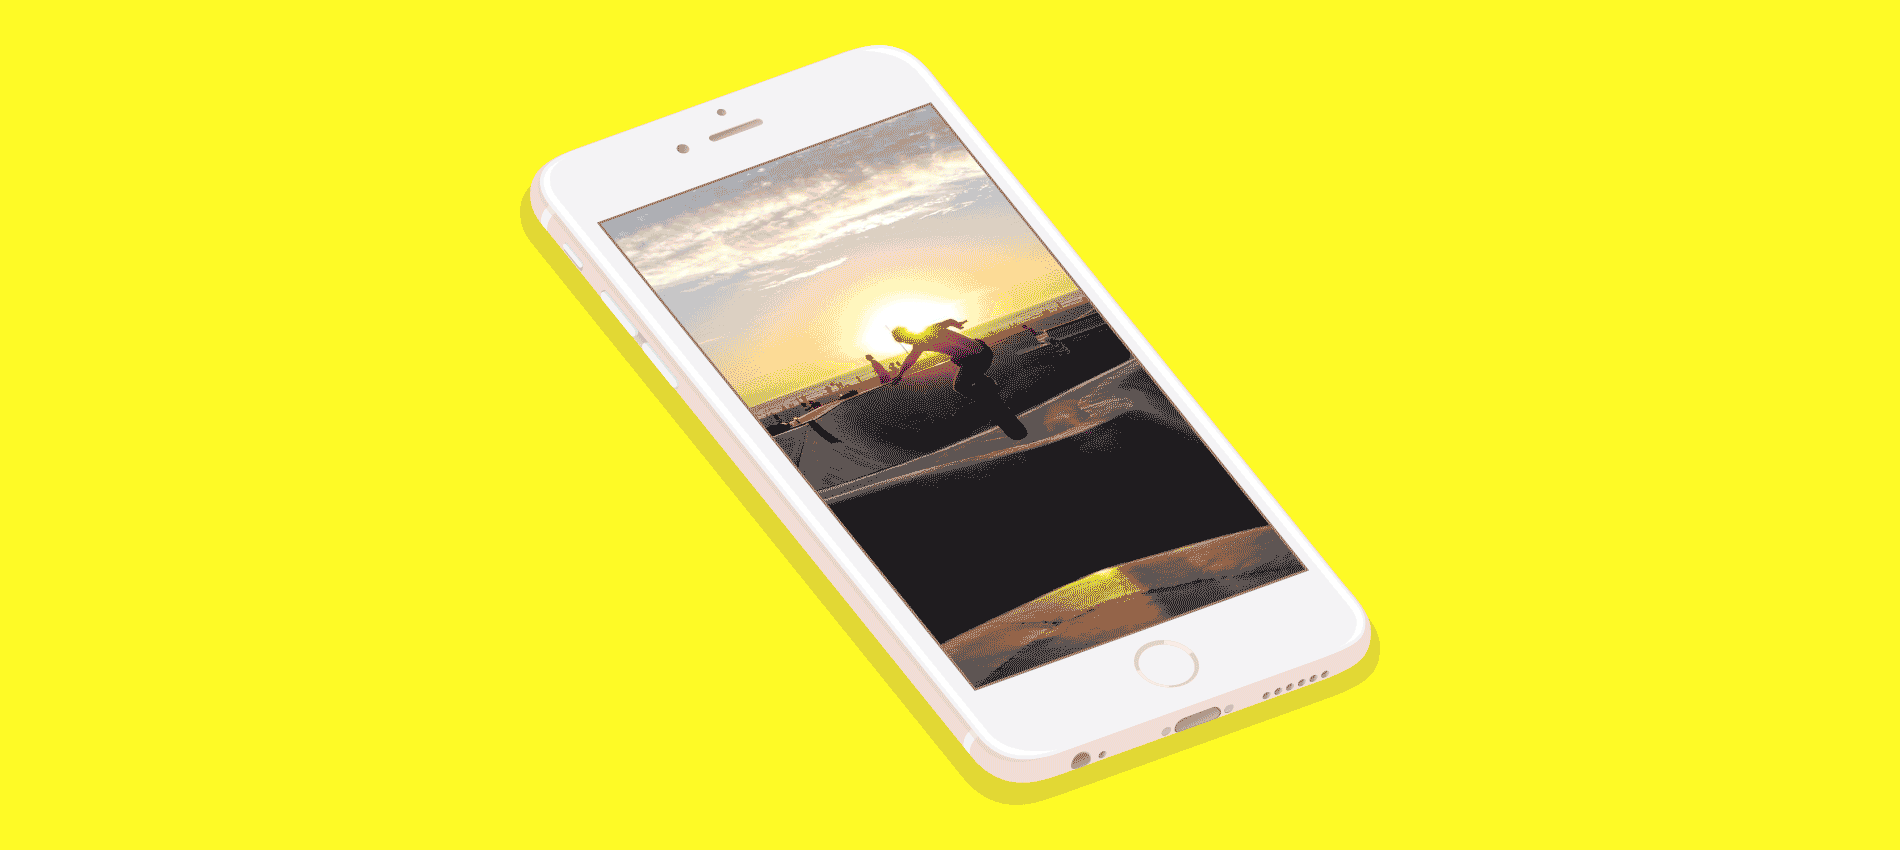 Everything You Need to Know About Snapchat Geofilters (And How to Build Your Own)